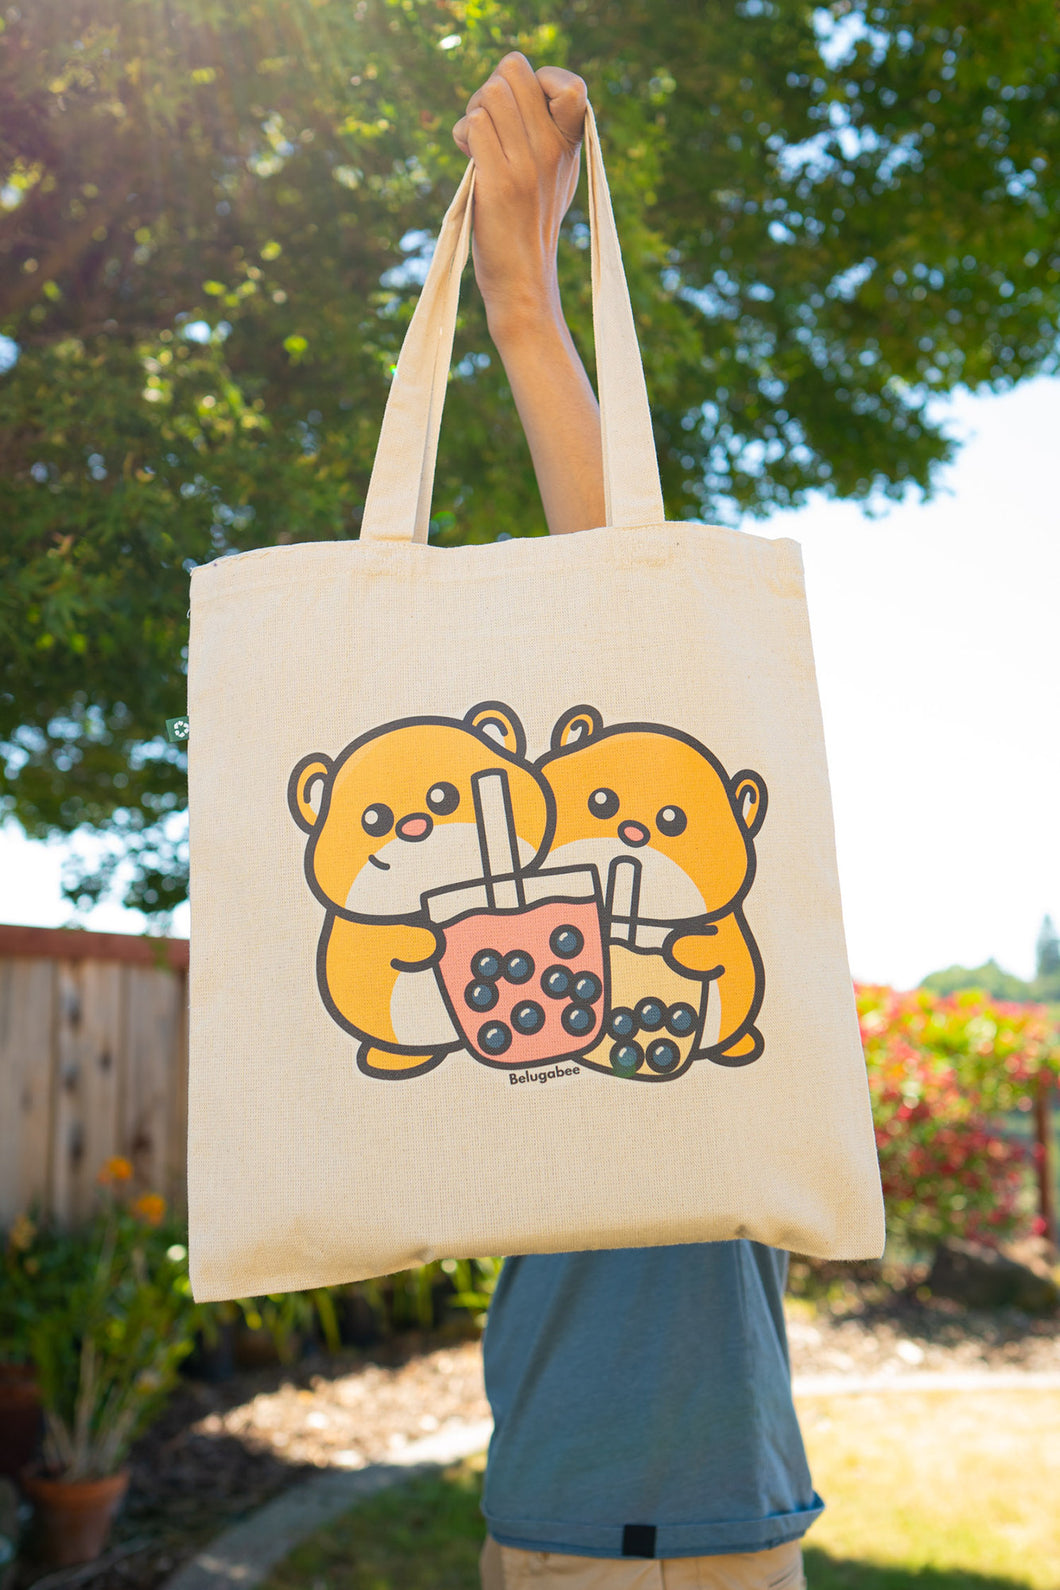 Belugabee Hamster Boba Tote Bag Alt Text: A whimsical tote featuring adorable hamsters enjoying boba drinks. Crafted with care on eco-friendly material, this bag blends cuteness with environmental consciousness. 🐹🥤👜 #BobaTote #CuteEcoFashion #HamsterDesign